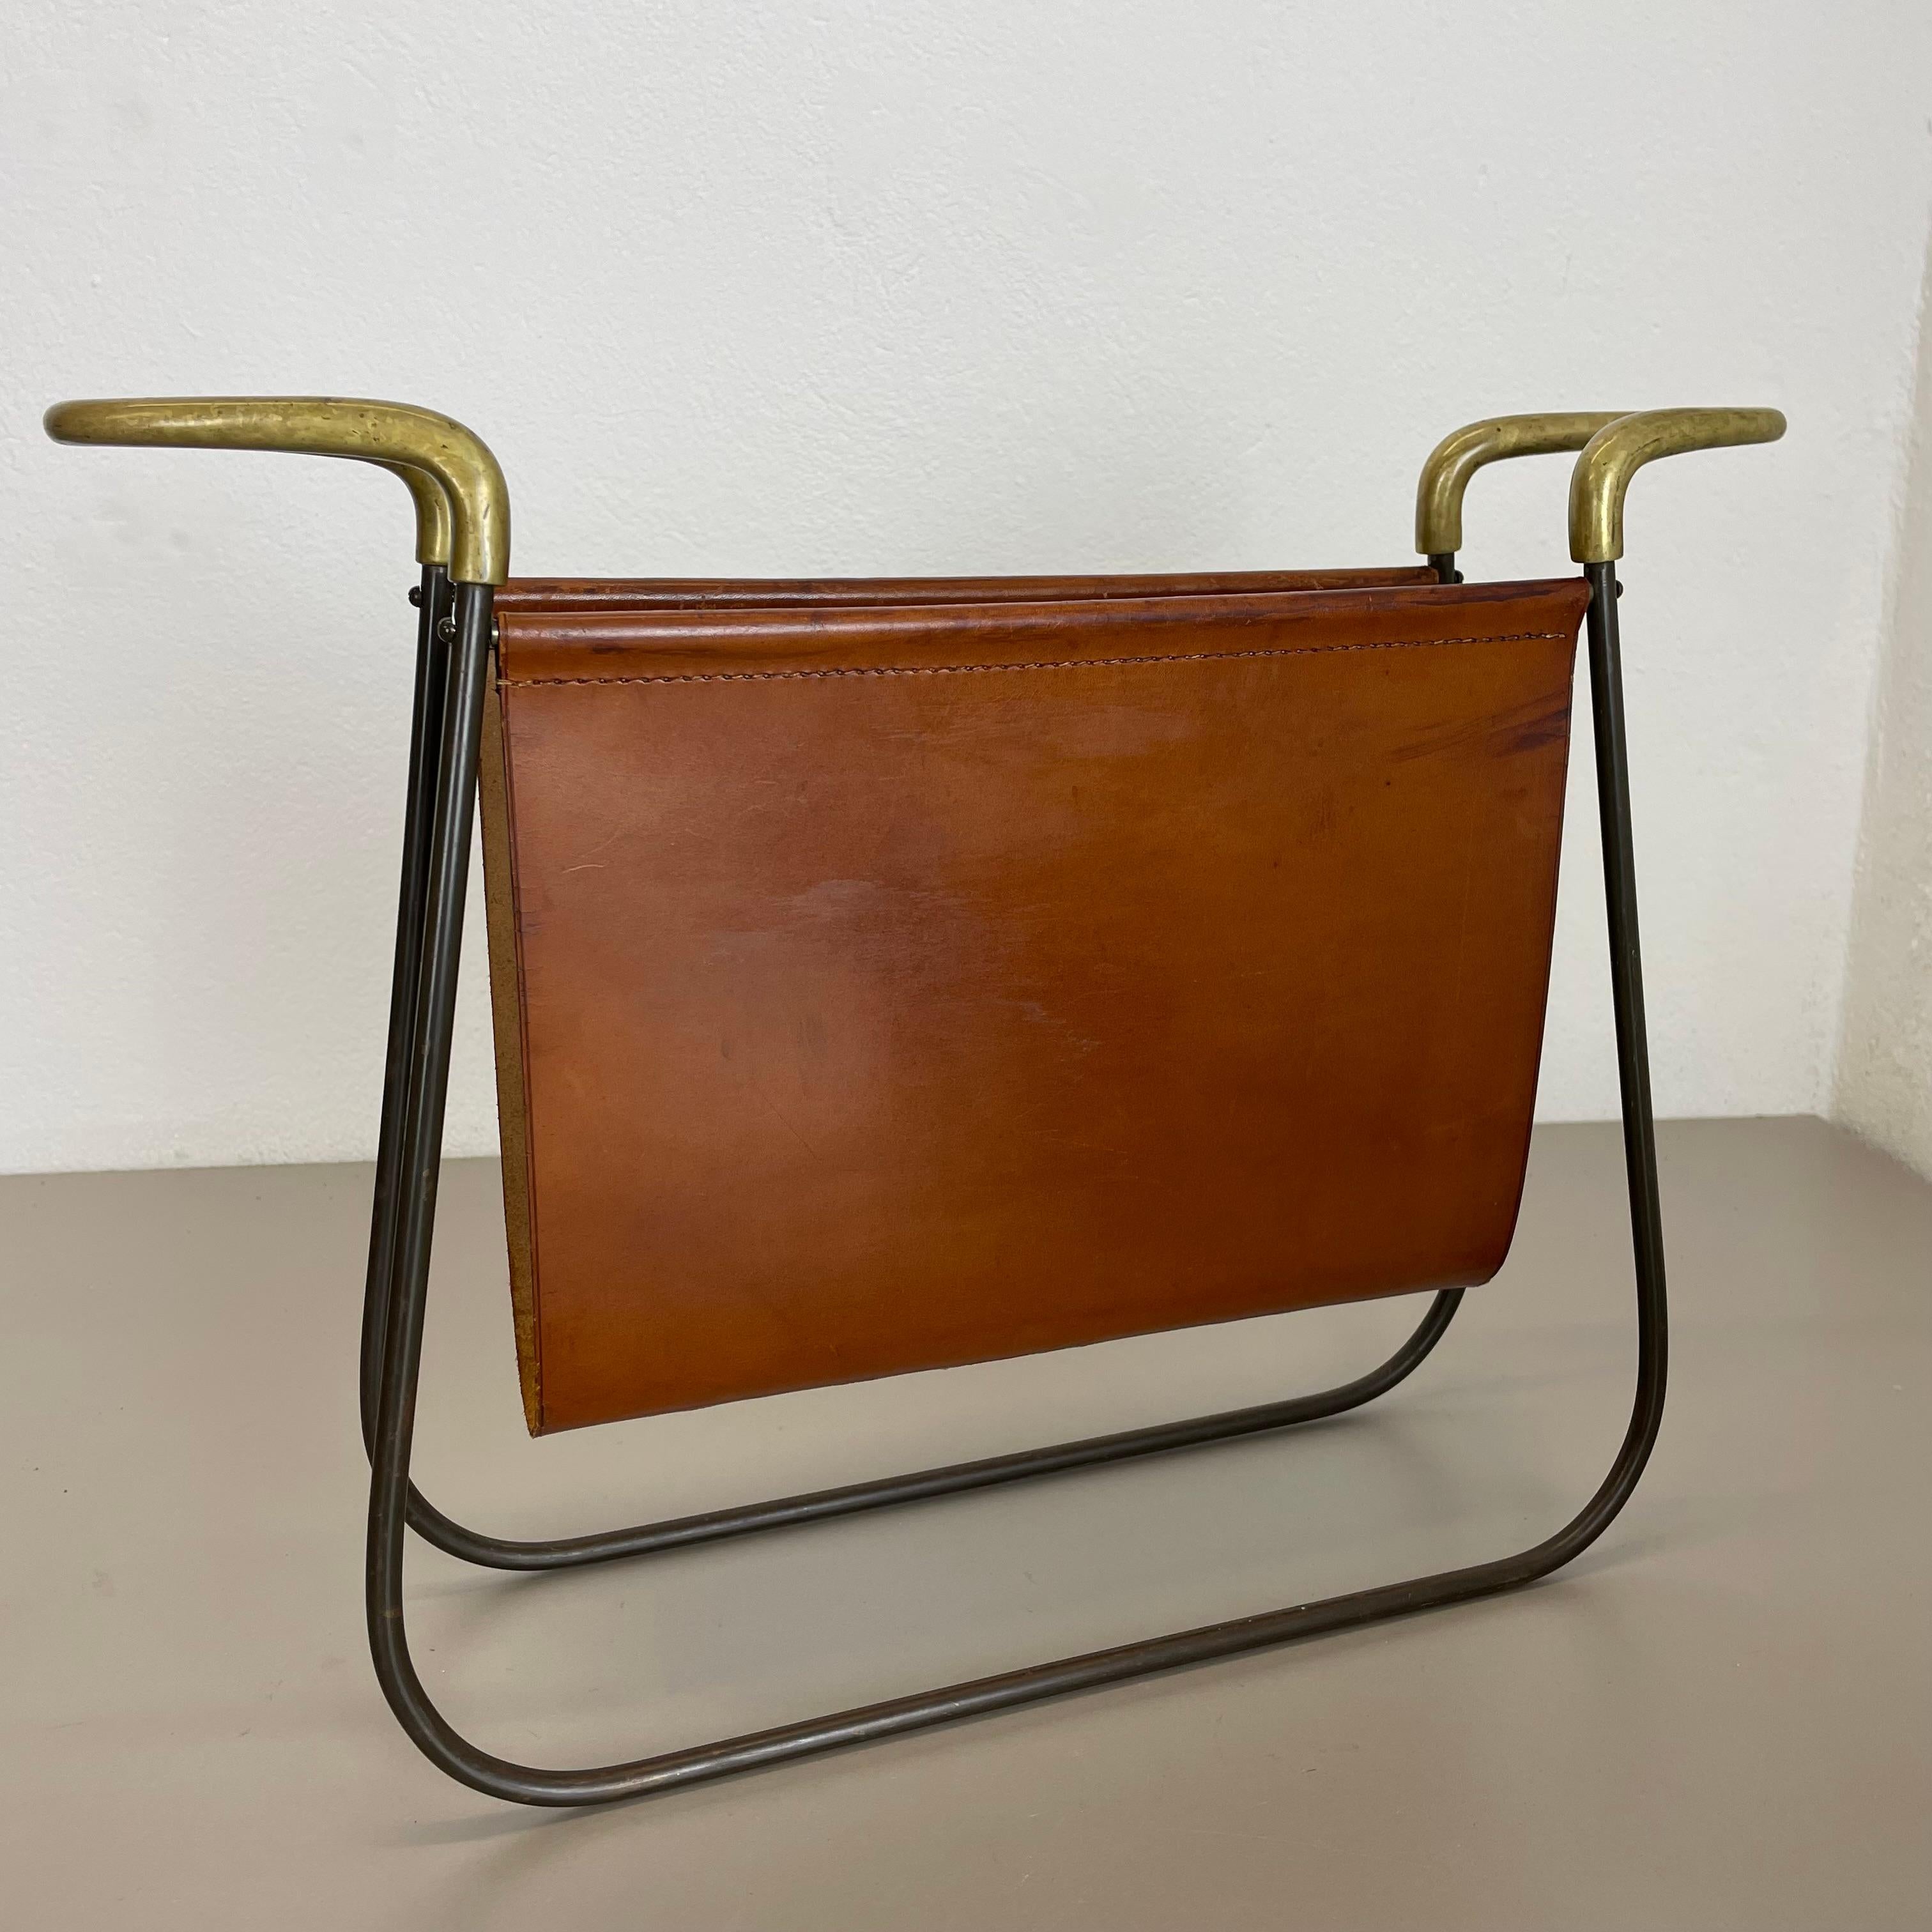 rare Brass and Brown Leather Magazine Holder Model by Carl Auböck, Austria 1950s For Sale 10